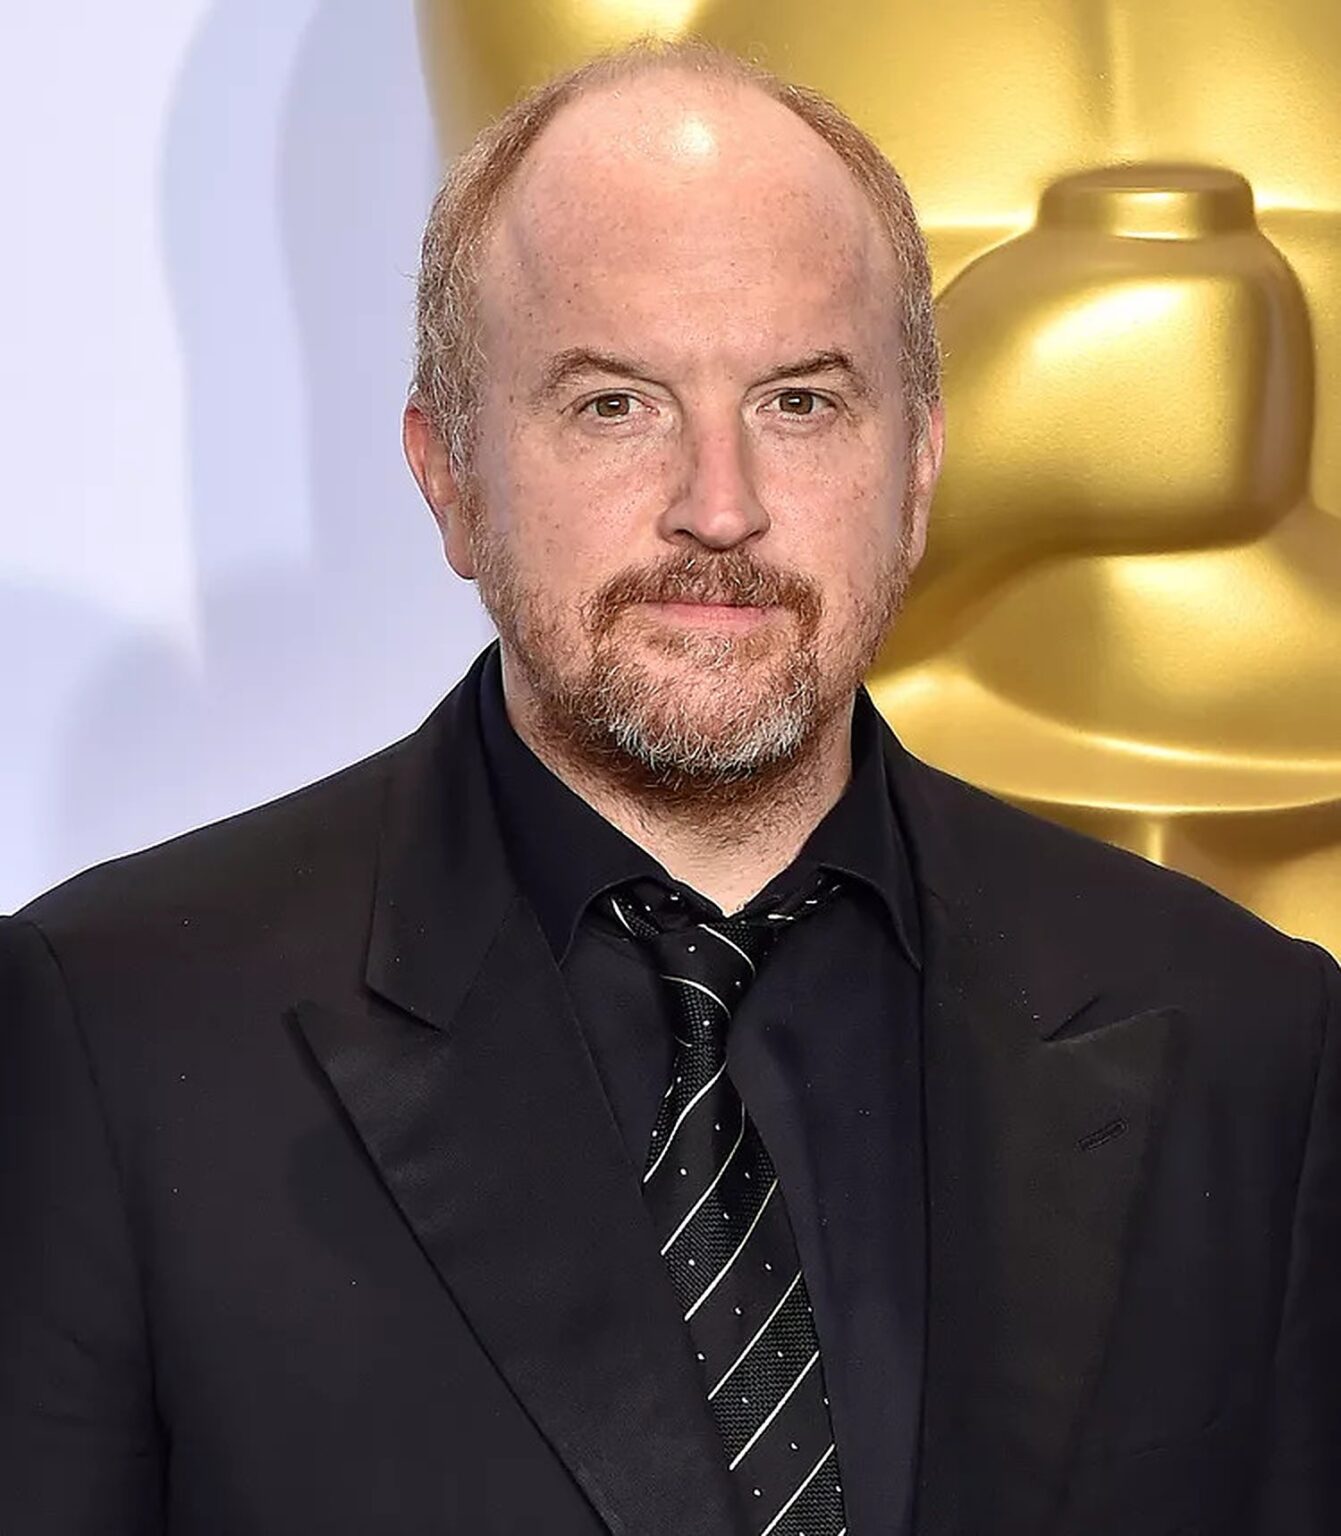 Is Louis C.K. truly sorry for all he is tied to within the #MeToo era? Let's take a deep dive and see what there is to be seen.